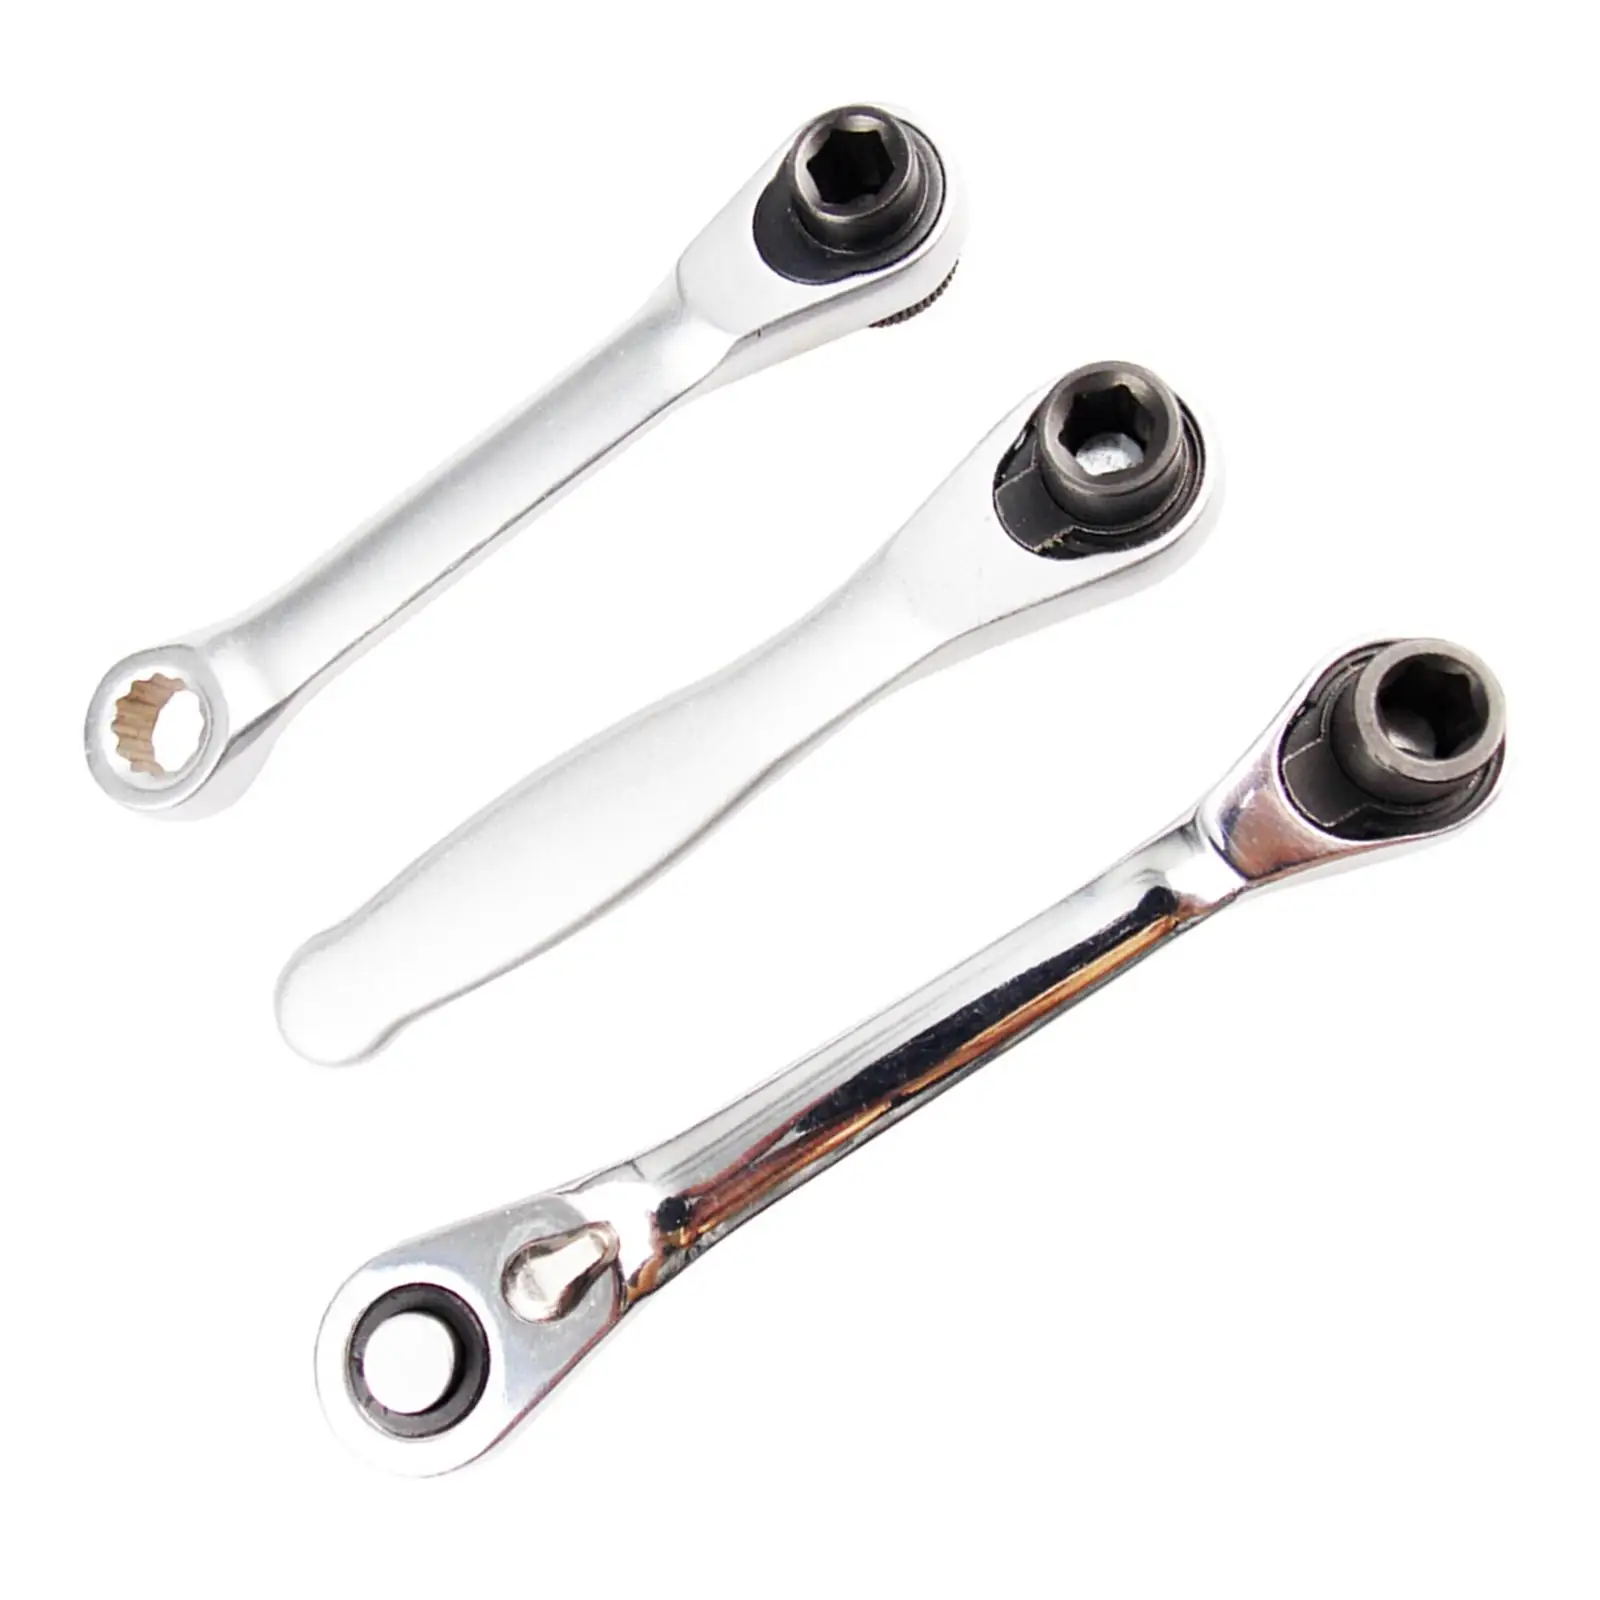 Steel Torch Wrench Double End Quick Socket Ratchet Wrench Metric Ratchet Combination Wrenches for Motorcycle Car Repair